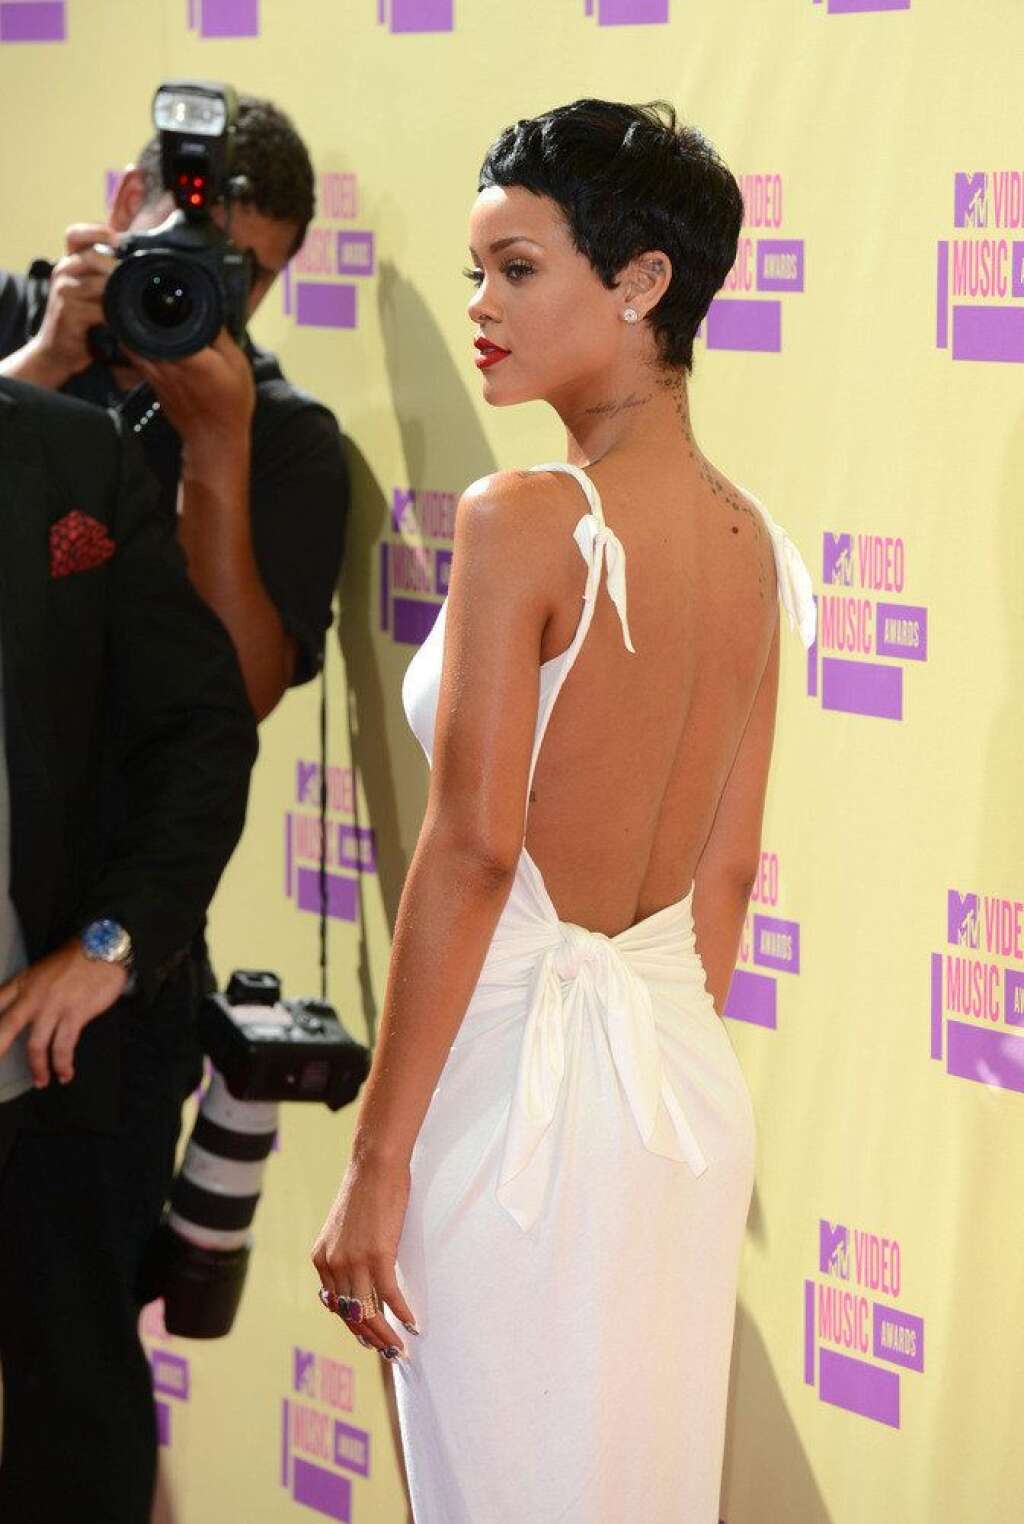 MTV VMA 2012 Arrivals - Los Angeles - Rihanna arriving at the MTV Video Music Awards at the Staples Centre, Los Angeles.